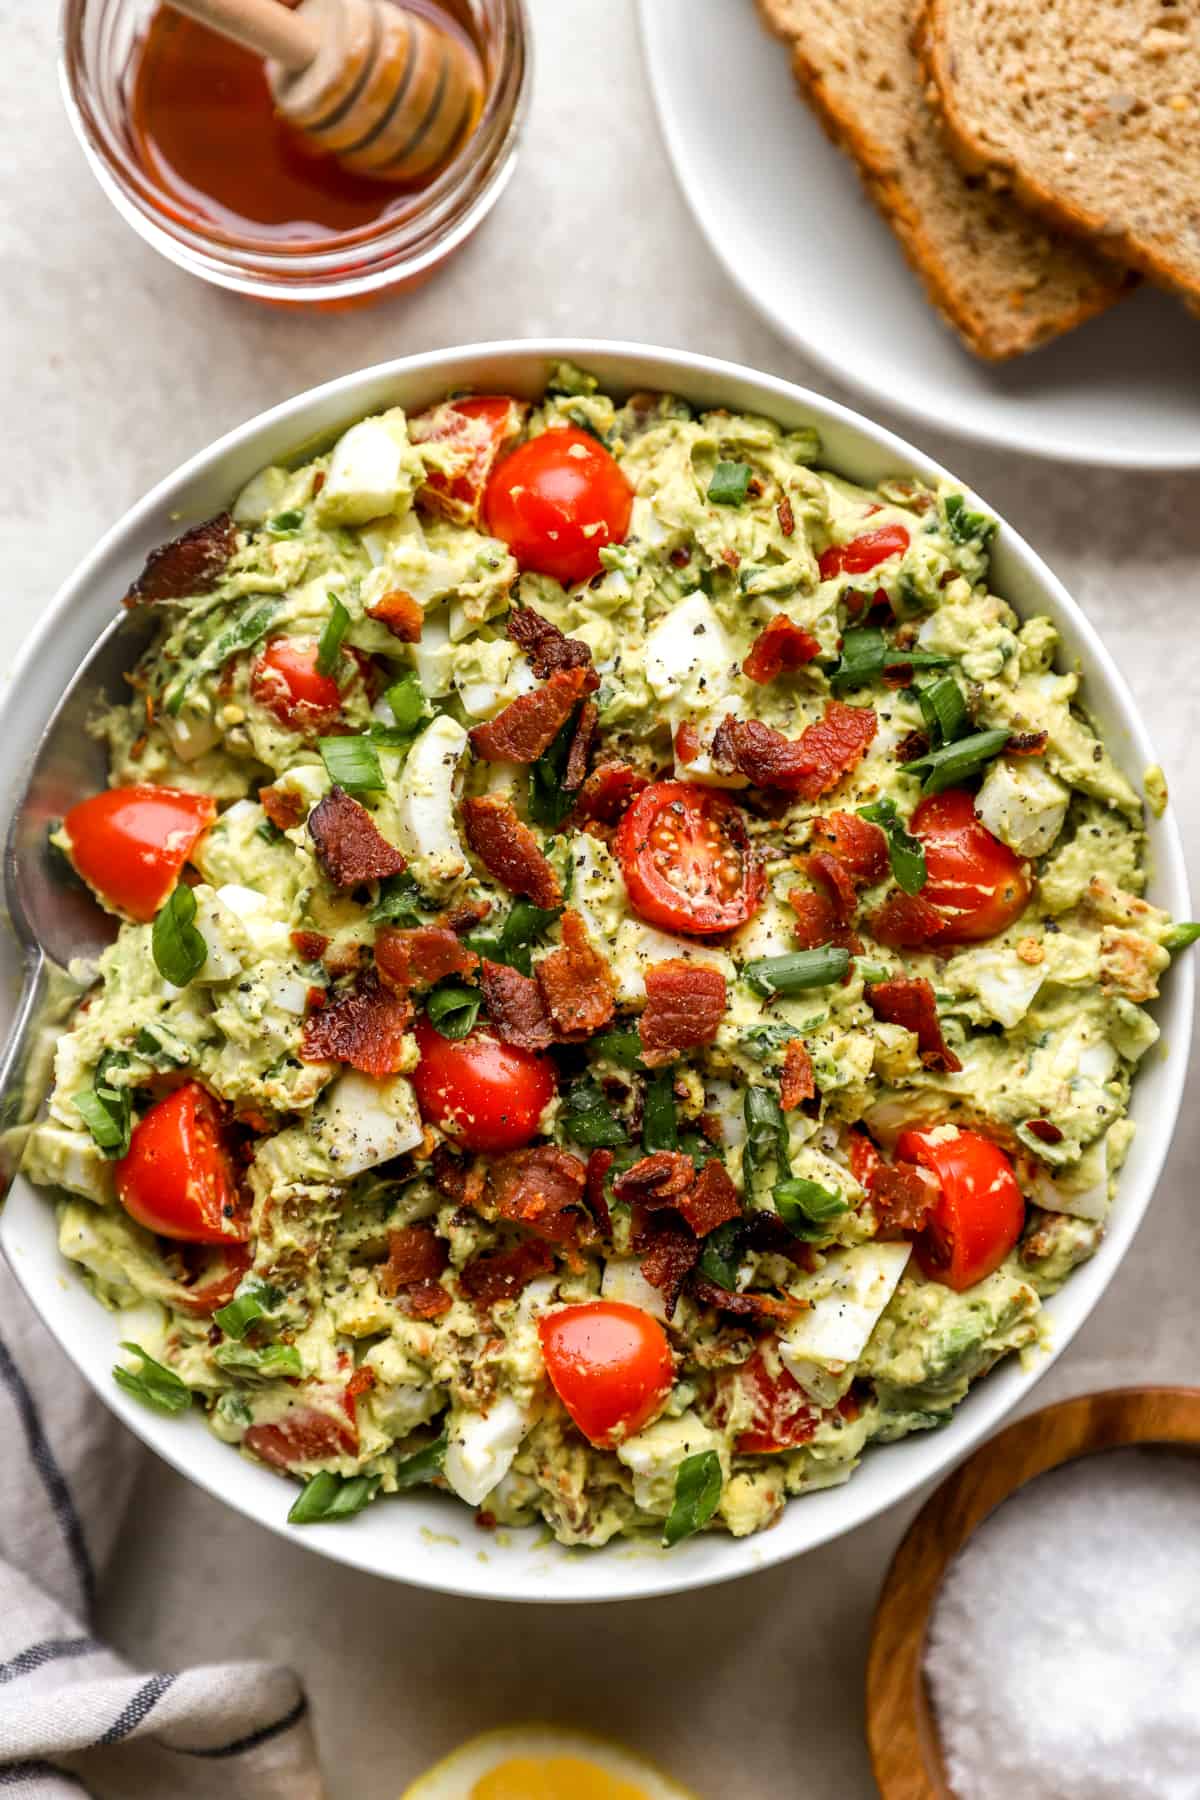 Finish the avocado egg salad in a bowl.